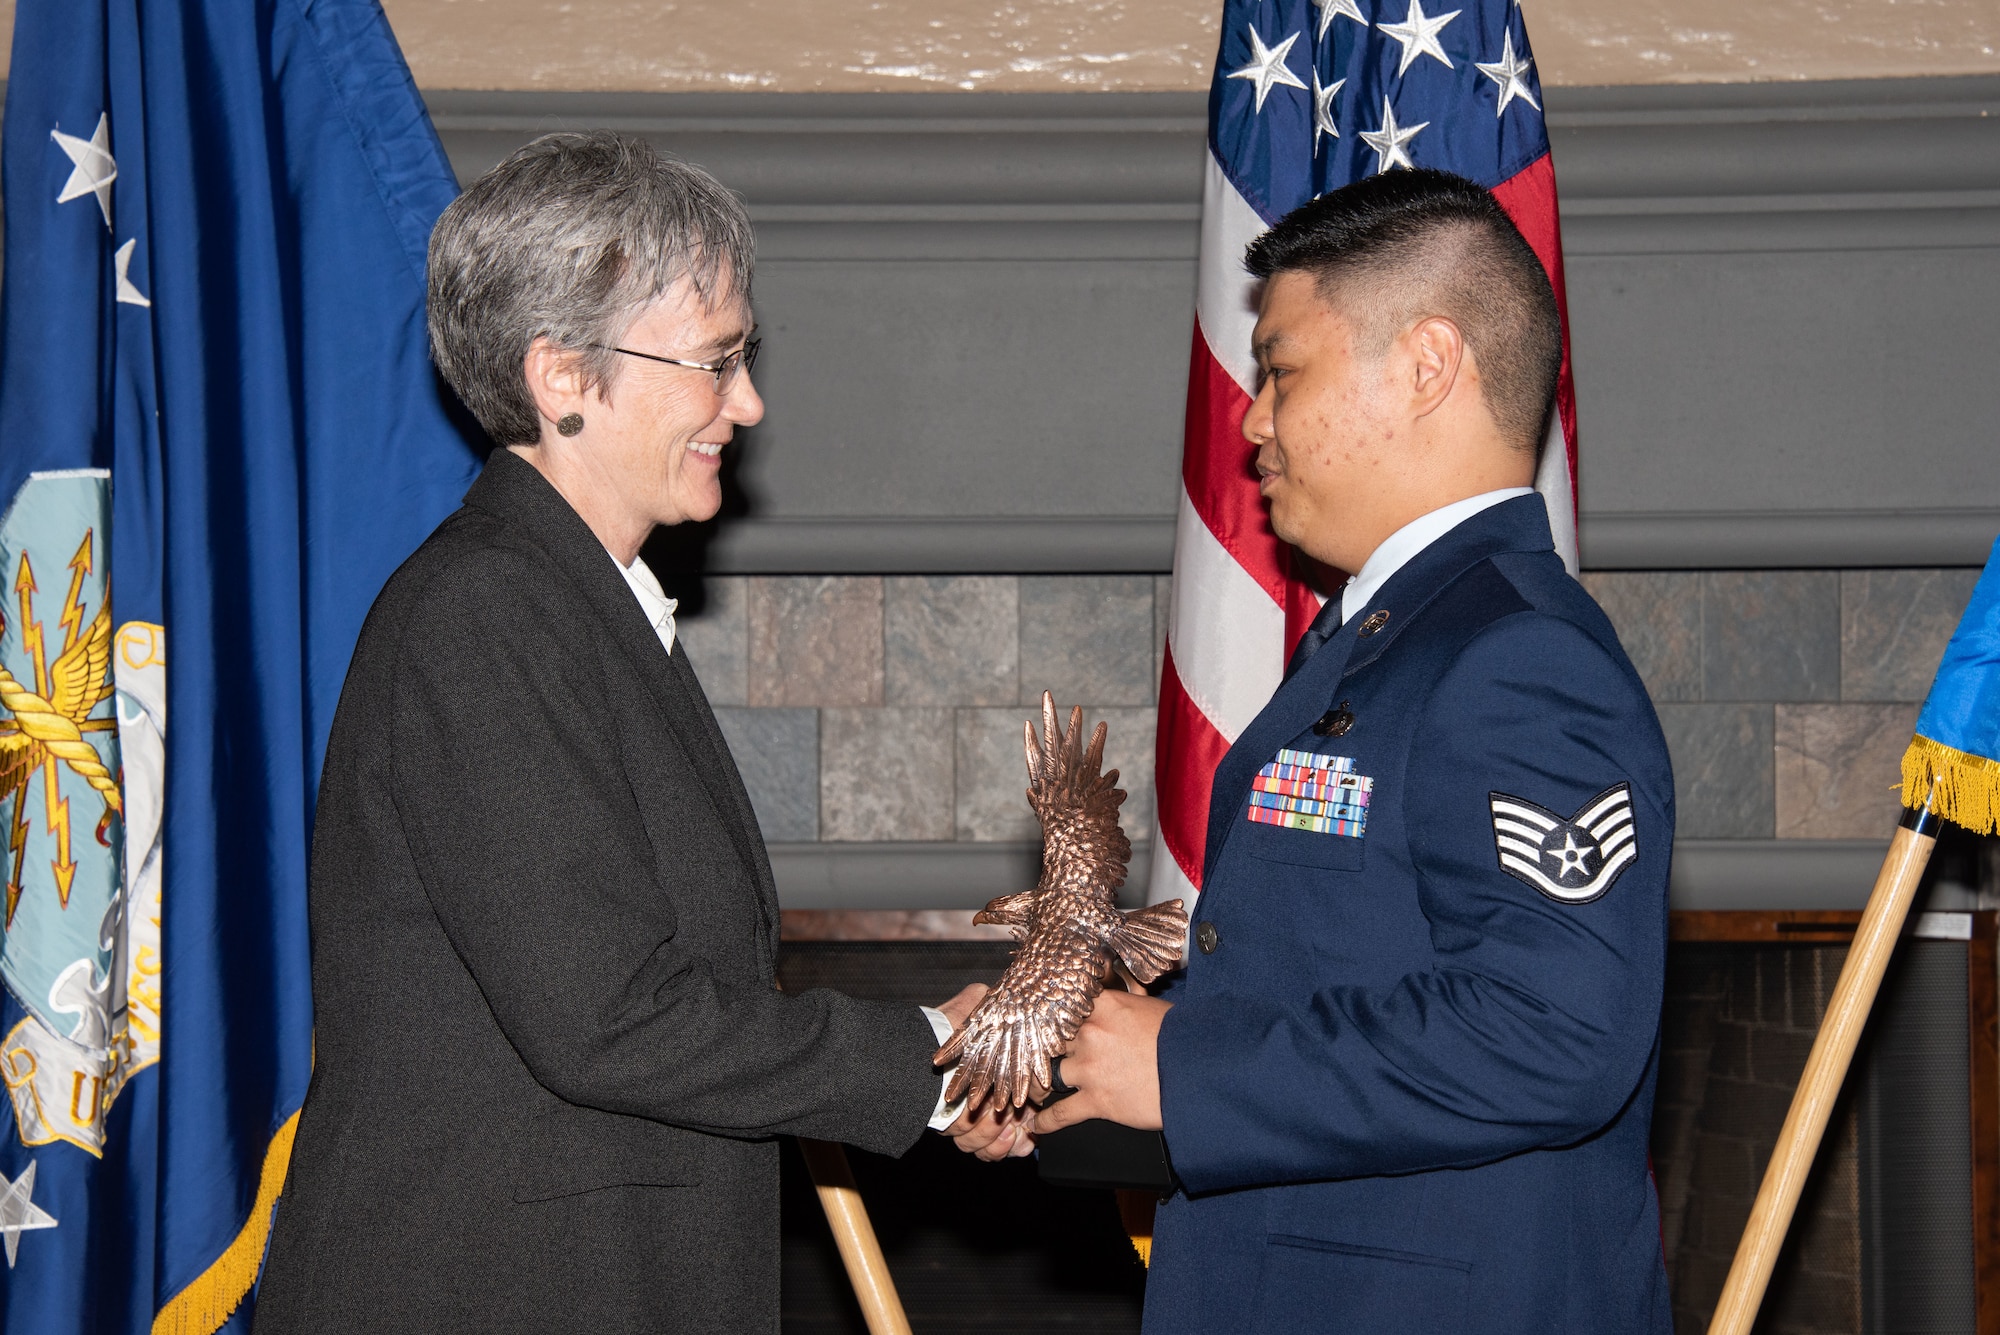 Secretary of the Air Force Heather Wilson, left, presents Staff Sgt. John Condol, 22nd Training Support Squadron assignments NCOIC, right, with the 2019 Secretary of the Air Force Leadership Award May 14, 2019, at Maxwell Air Force Base, Alabama. Condol oversaw a three-person team, driving the success of 800 trainee assignments, 1,100 permanent change of station orders and 196 security clearance investigations. In addition, he coordinated an Air Force Personnel Center site visit, improving timelines and communication between AFPC and the Officer Training School.